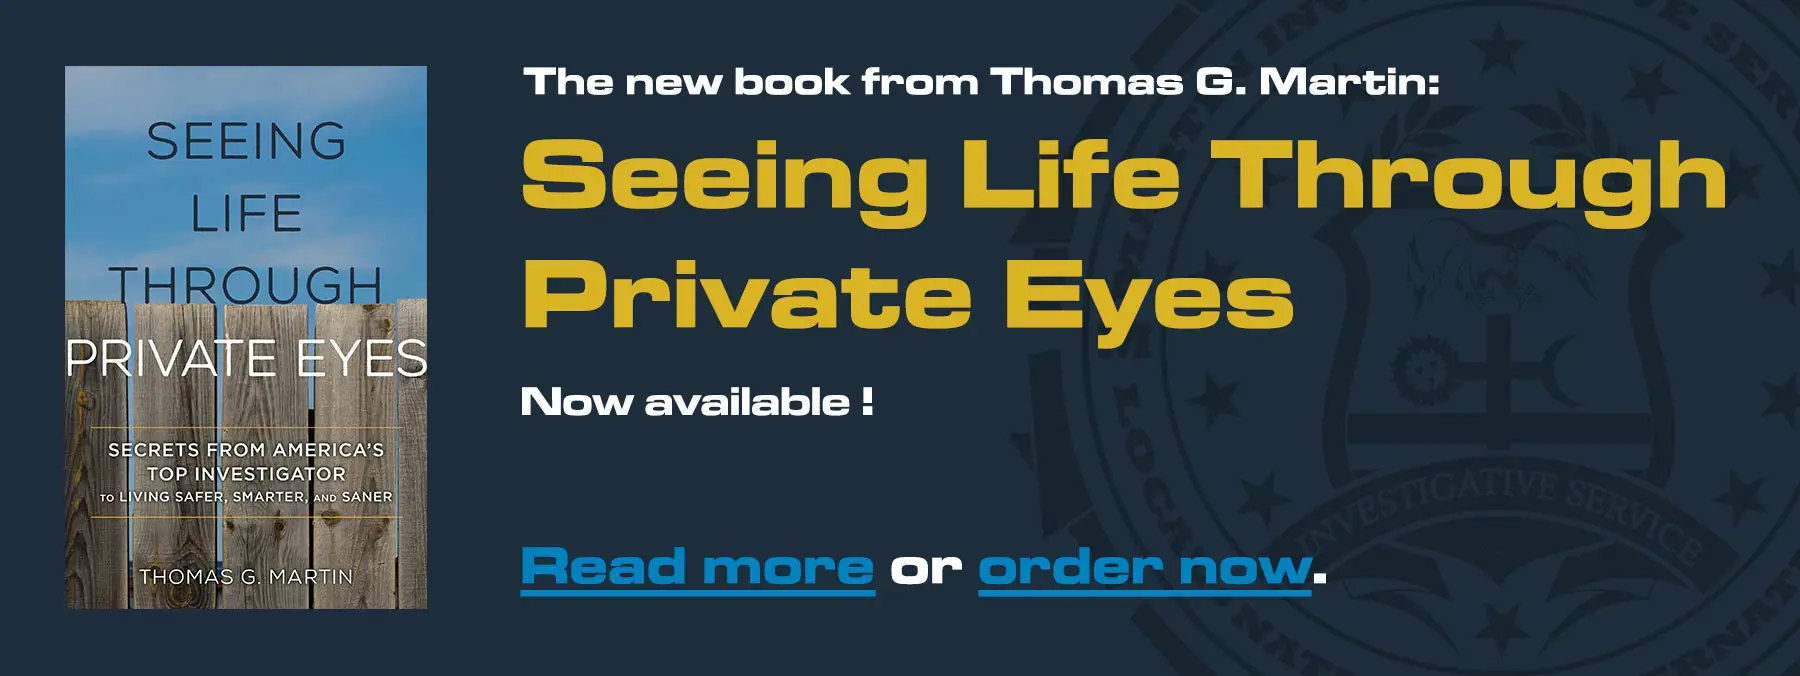 Seeing Life Through Private Eyes: The new book by Thomas G. Martin, is not available. Read more or order now.